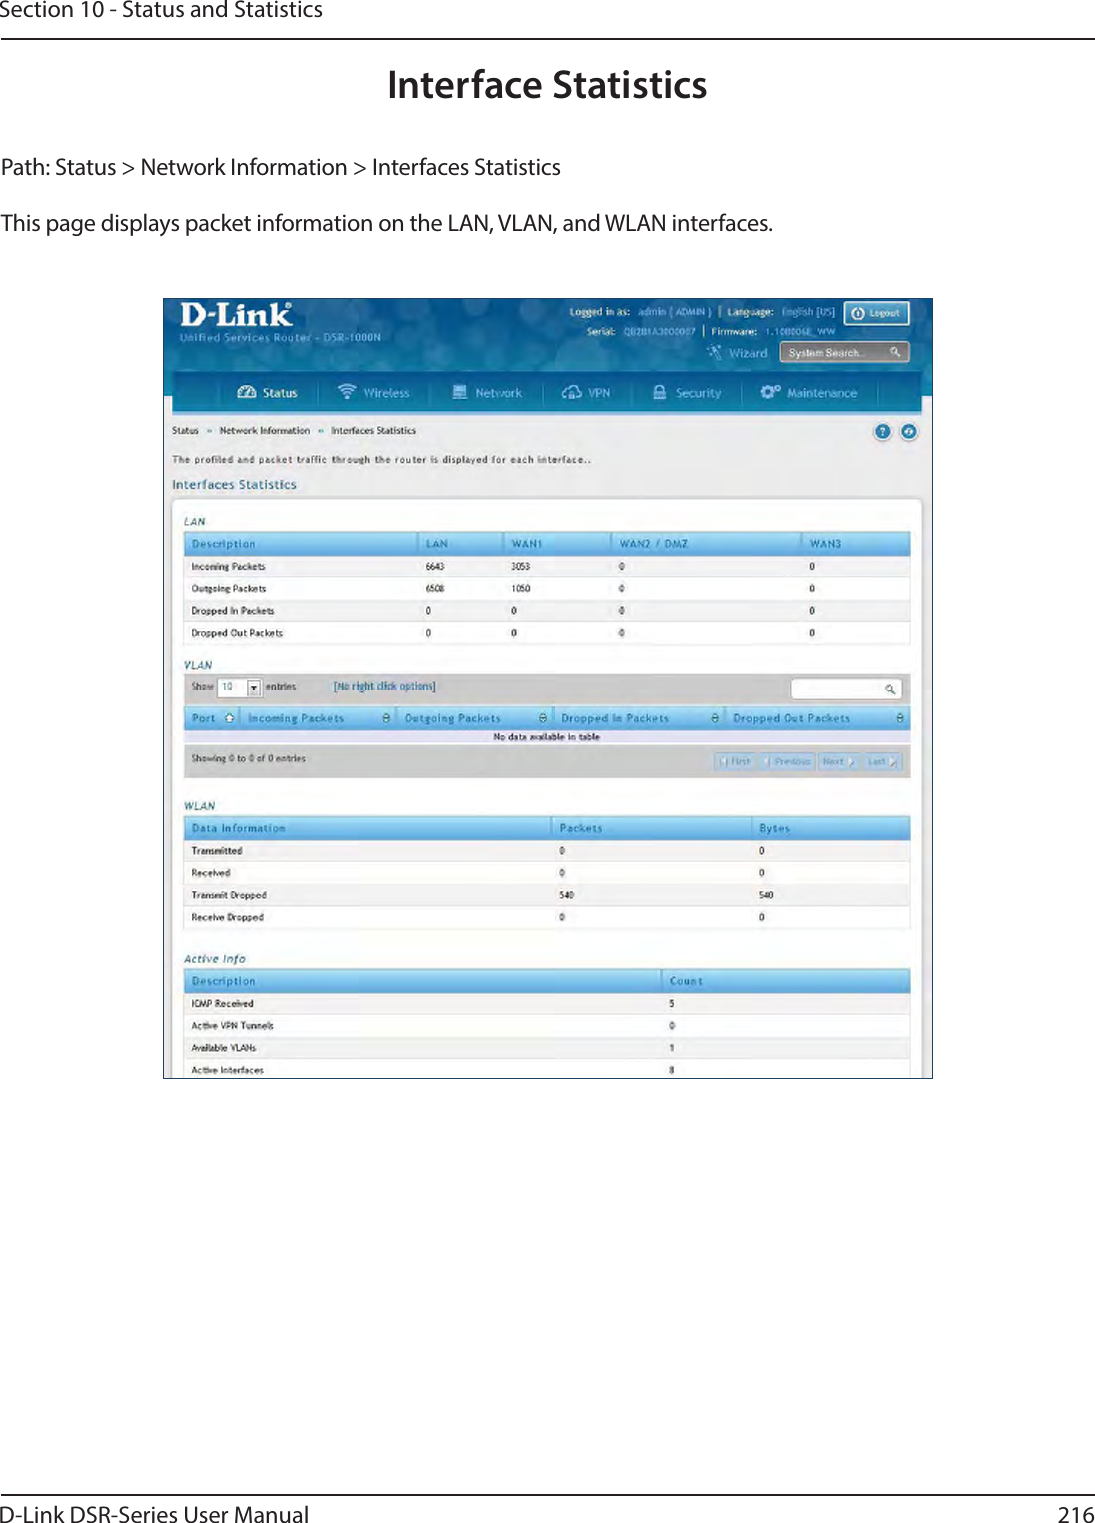 D-Link DSR-Series User Manual 216Section 10 - Status and StatisticsPath: Status &gt; Network Information &gt; Interfaces StatisticsThis page displays packet information on the LAN, VLAN, and WLAN interfaces.Interface Statistics